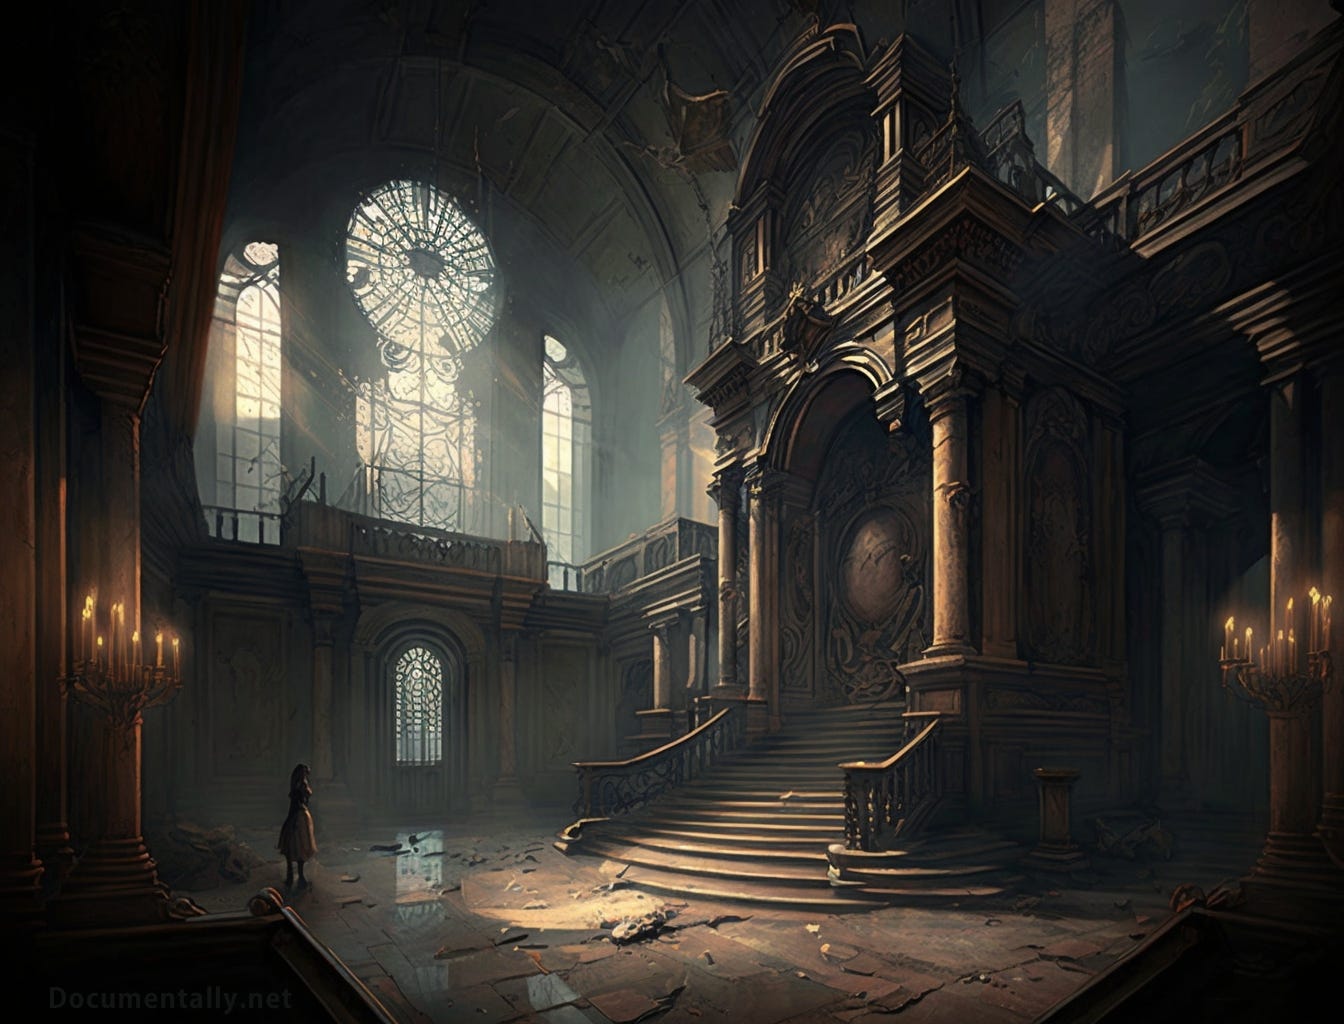 A dilapidated chapel. Light steams through the windows into a dusty stone place as a person stands in the shadows looking towards a staircase leading to an alter.